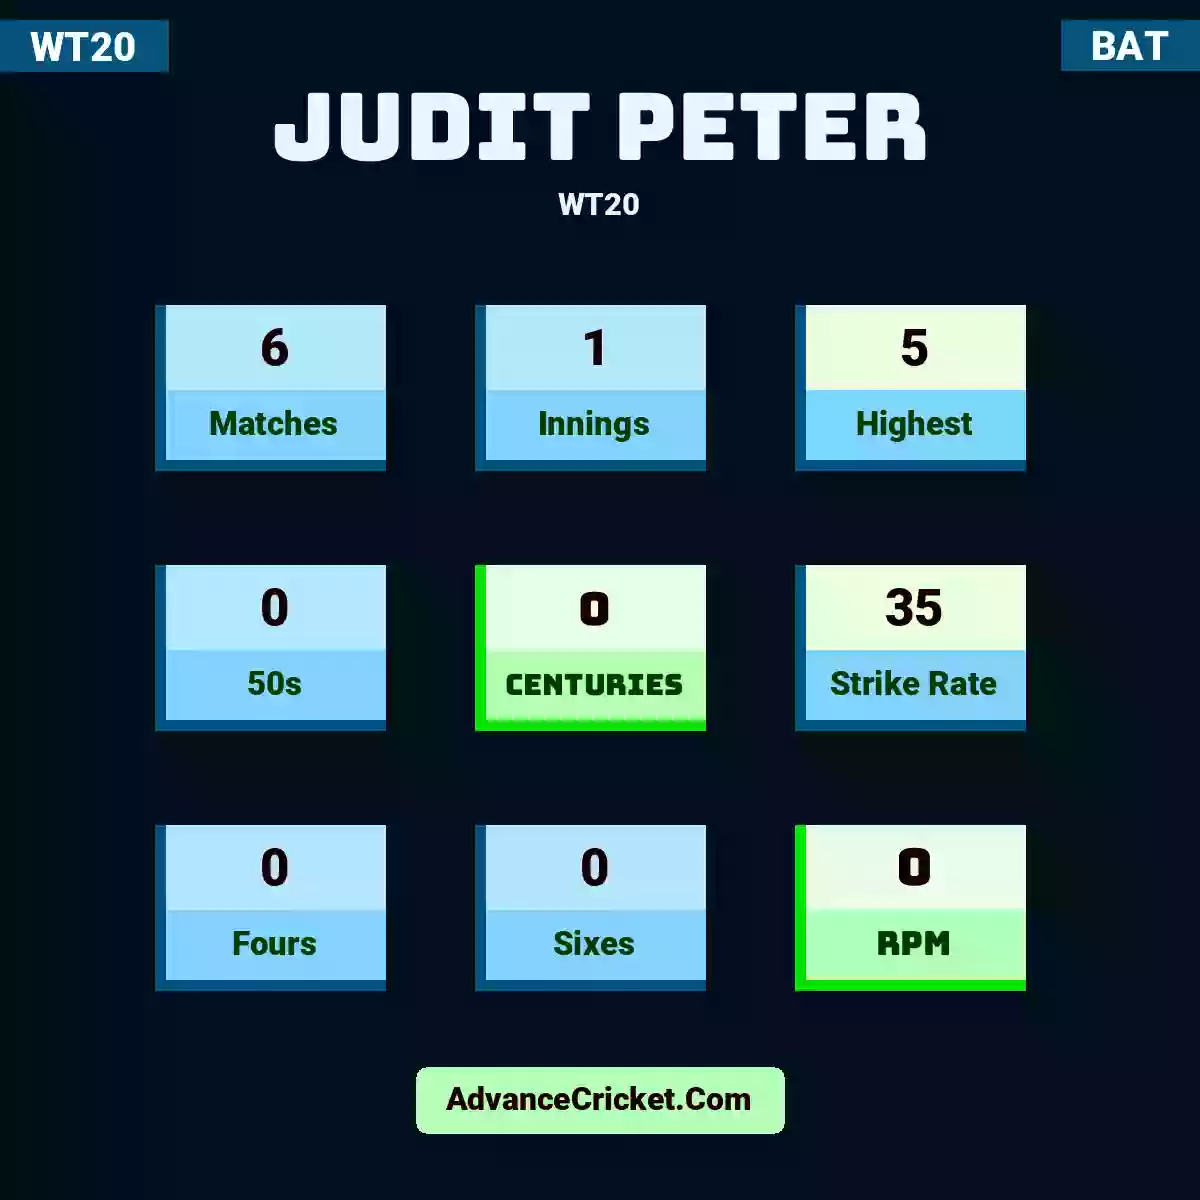 Judit Peter WT20 , Judit Peter played 6 matches, scored 5 runs as highest, 0 half-centuries, and 0 centuries, with a strike rate of 35. J.Peter hit 0 fours and 0 sixes, with an RPM of 0.